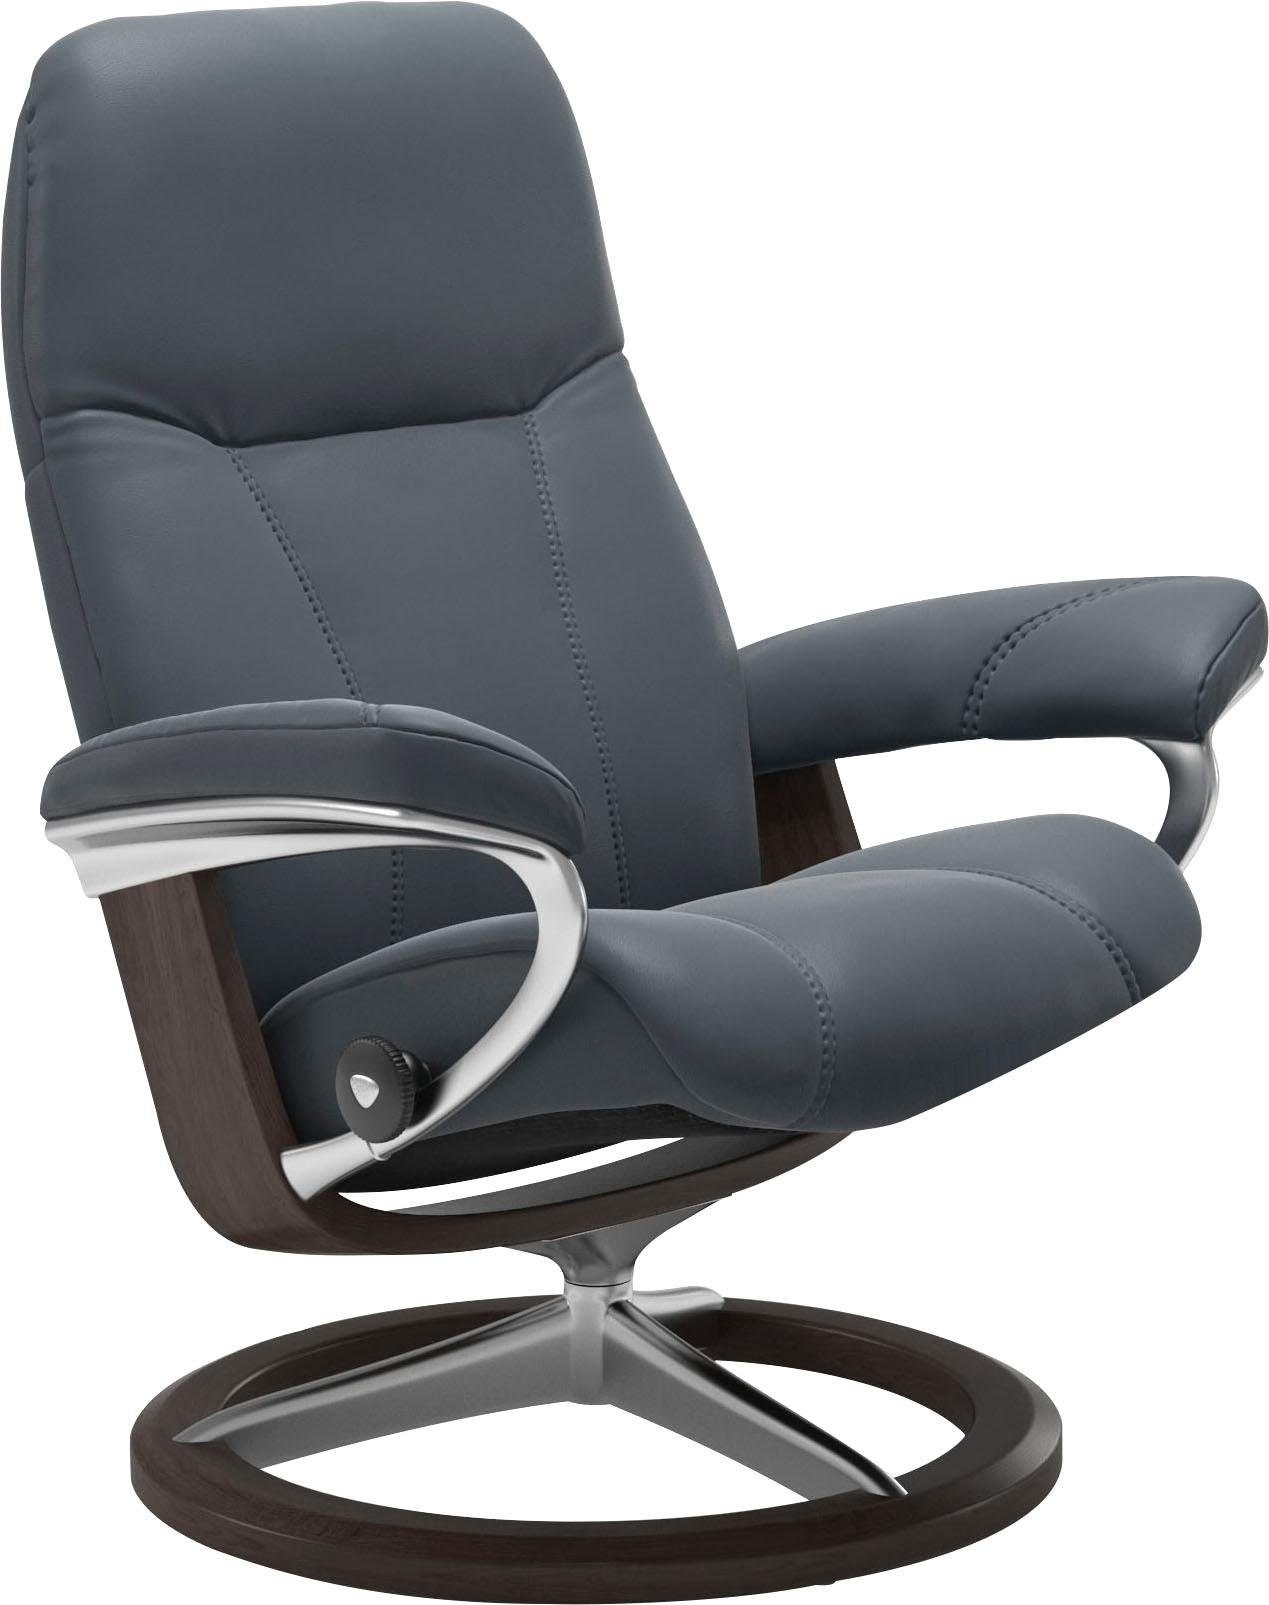 Consul, Signature Größe Wenge L, mit Base, Relaxsessel Gestell Stressless®